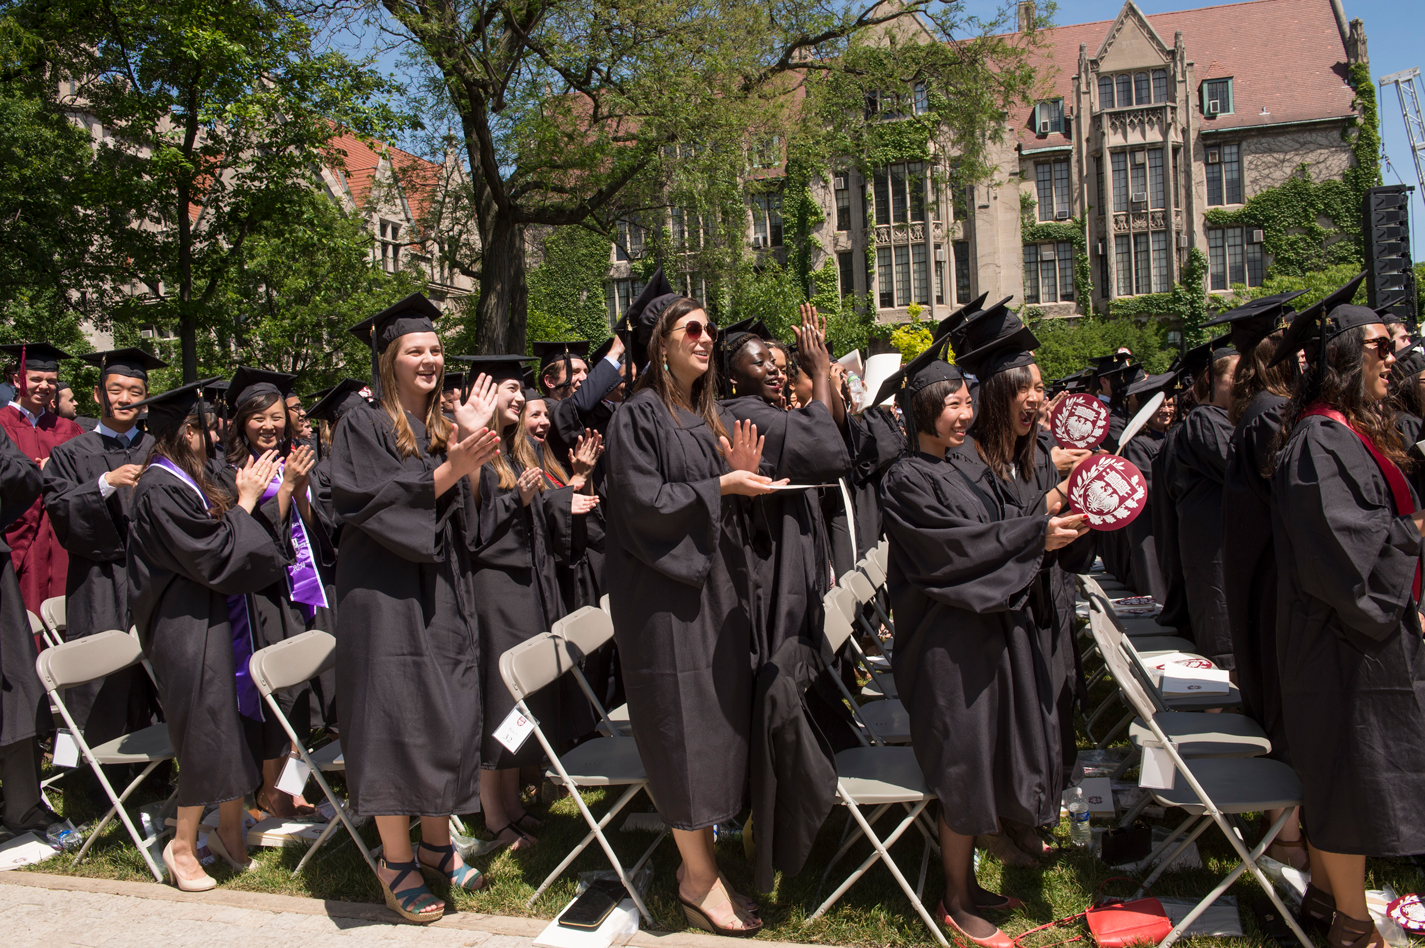 Students clapping during a graduation ceremony at The University of Chicago